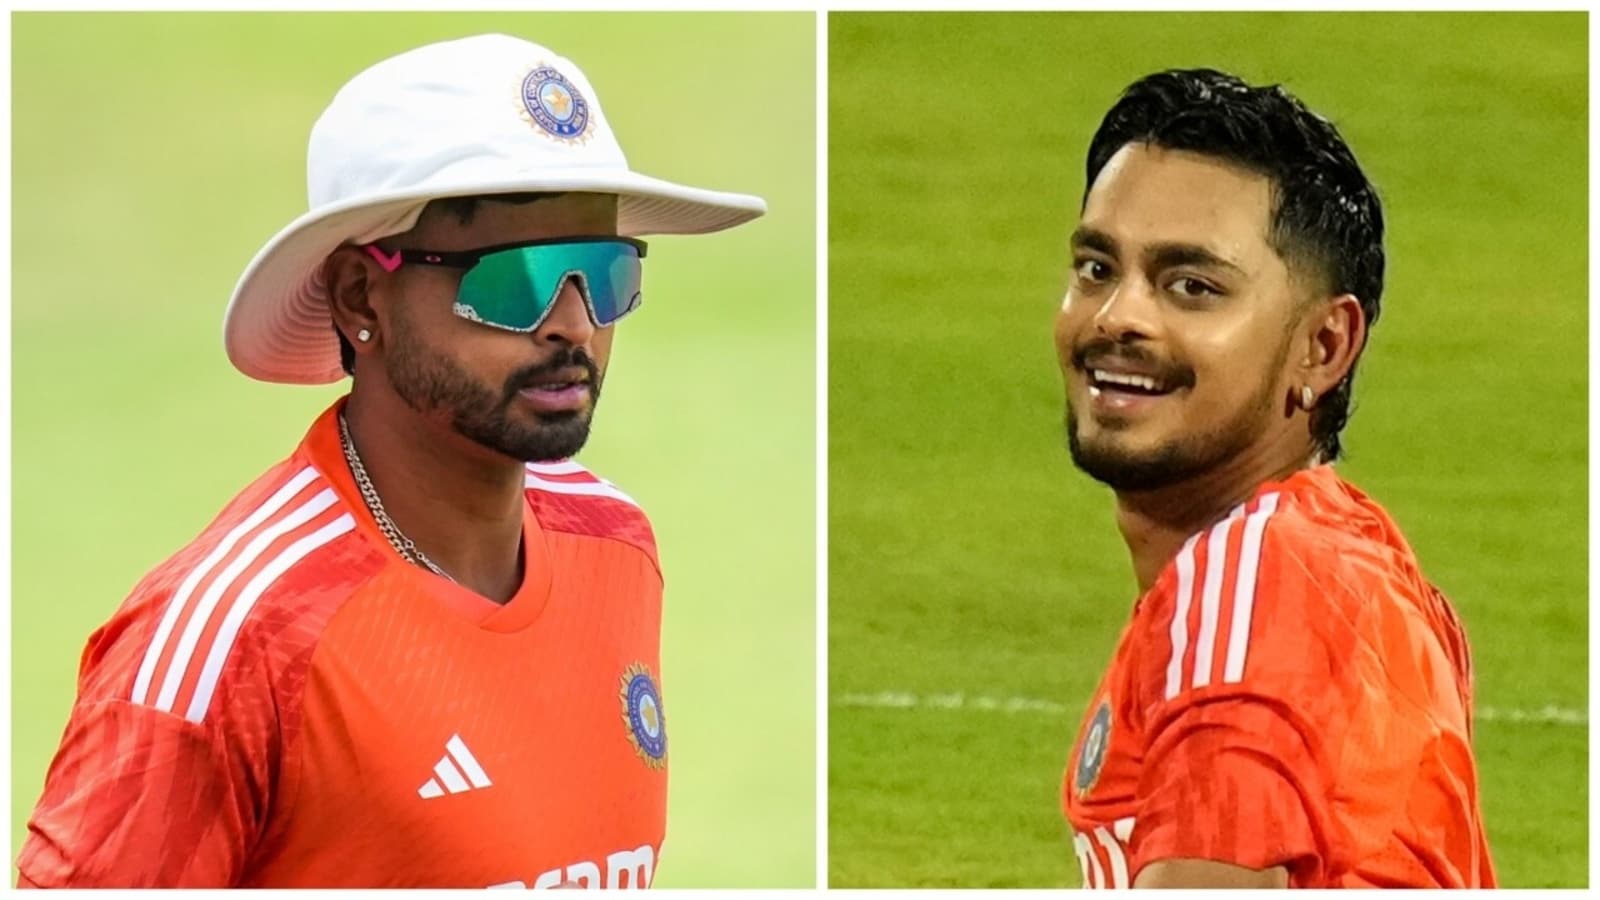 After BCCI snubs Ishan Kishan and Shreyas Iyer, ex-India pacer's hard-hitting remark: 'Earn money, who's stopping you?'